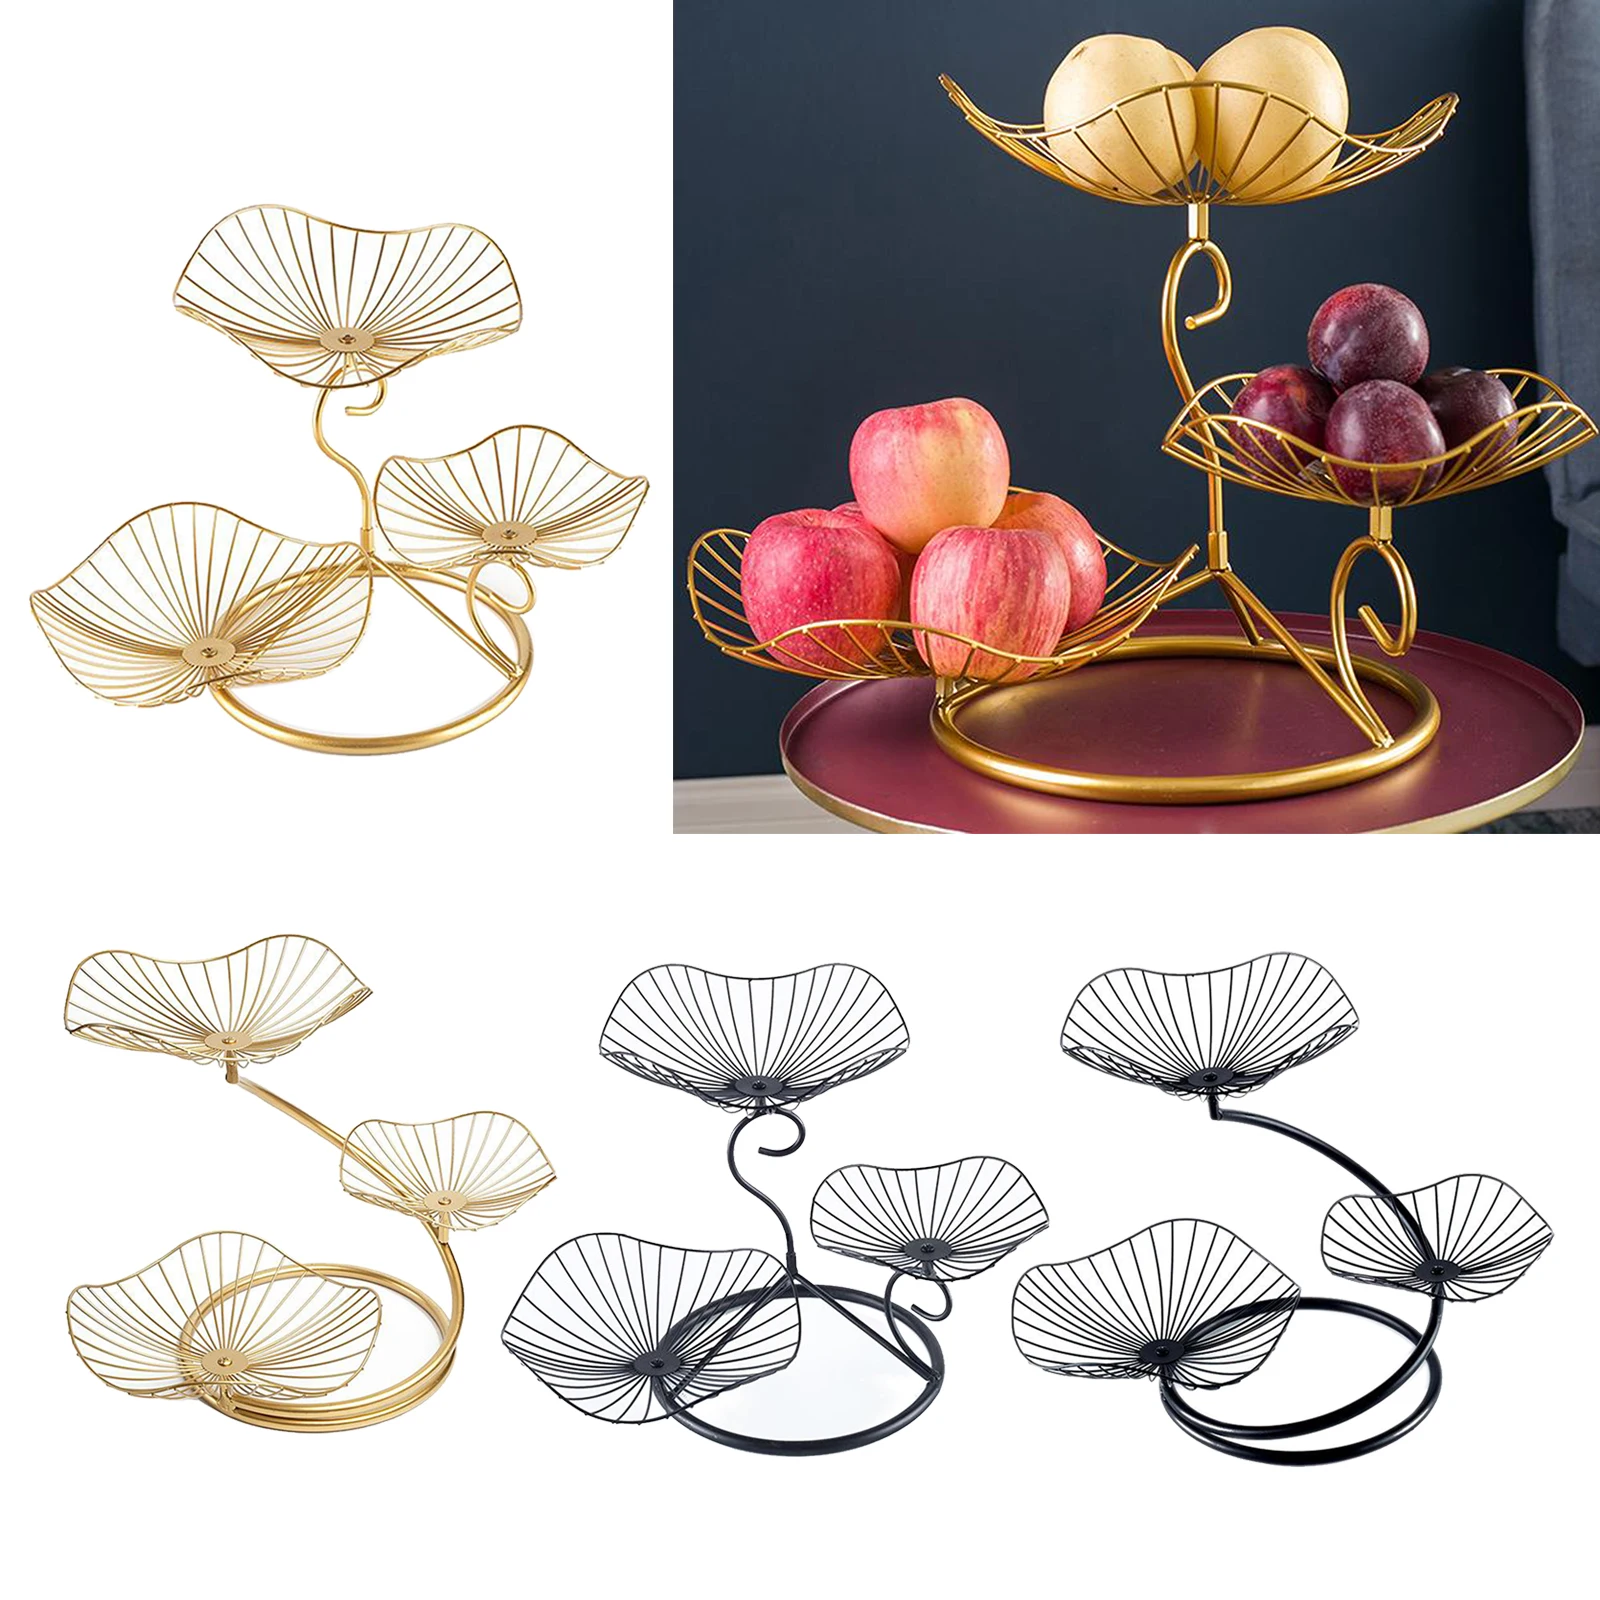 

Lotus Leaf Fruit Bowl Display Basket Iron Wire Fruit Drainer Holder Dish 3 Tier for Snacks Cookies Candies